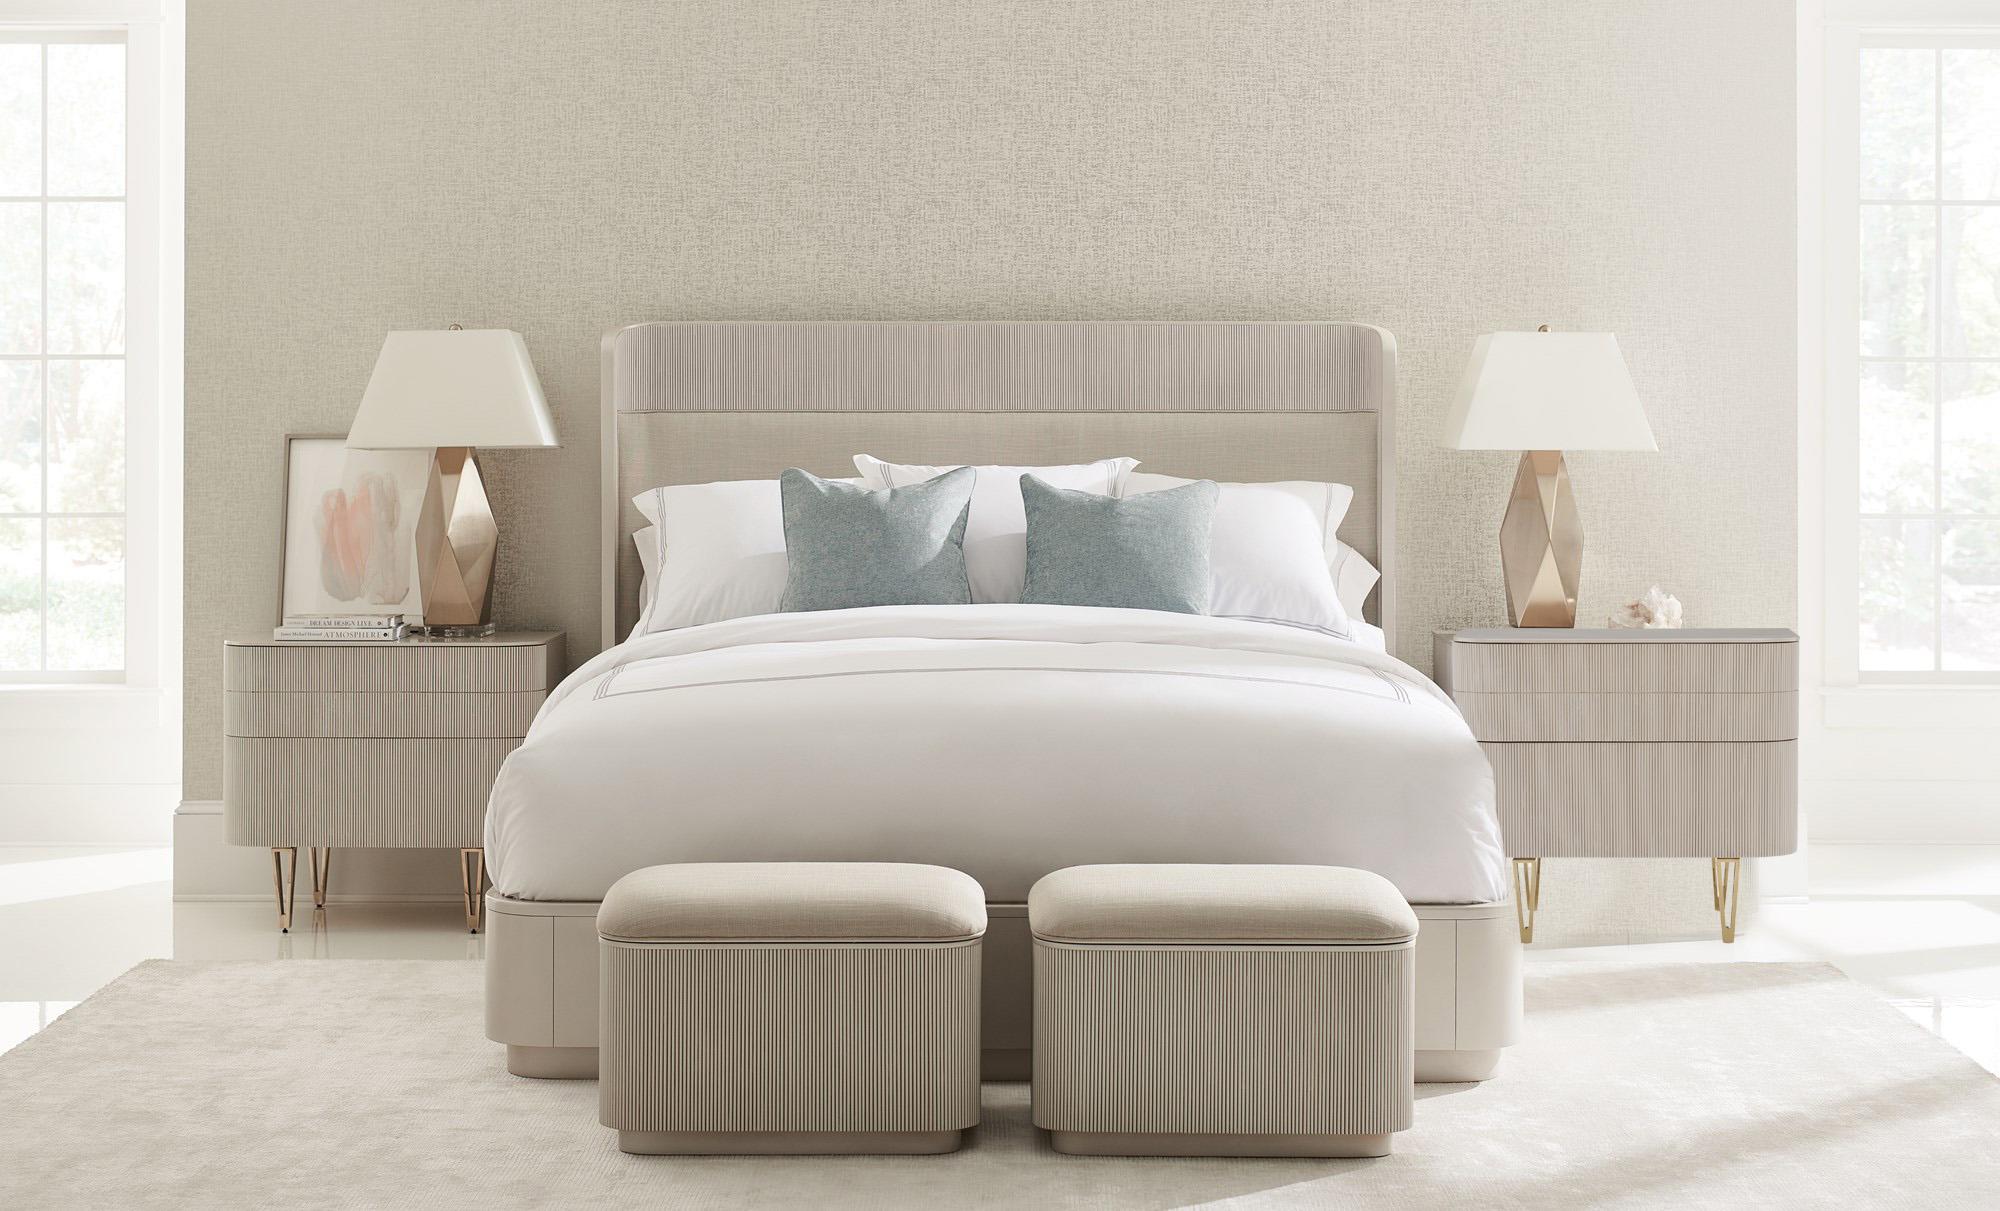 

    
Curved Headboard Matte Pearl Finish CAL King Bed Set 3Pcs FALL IN LOVE / TRUE LOVE by Caracole
